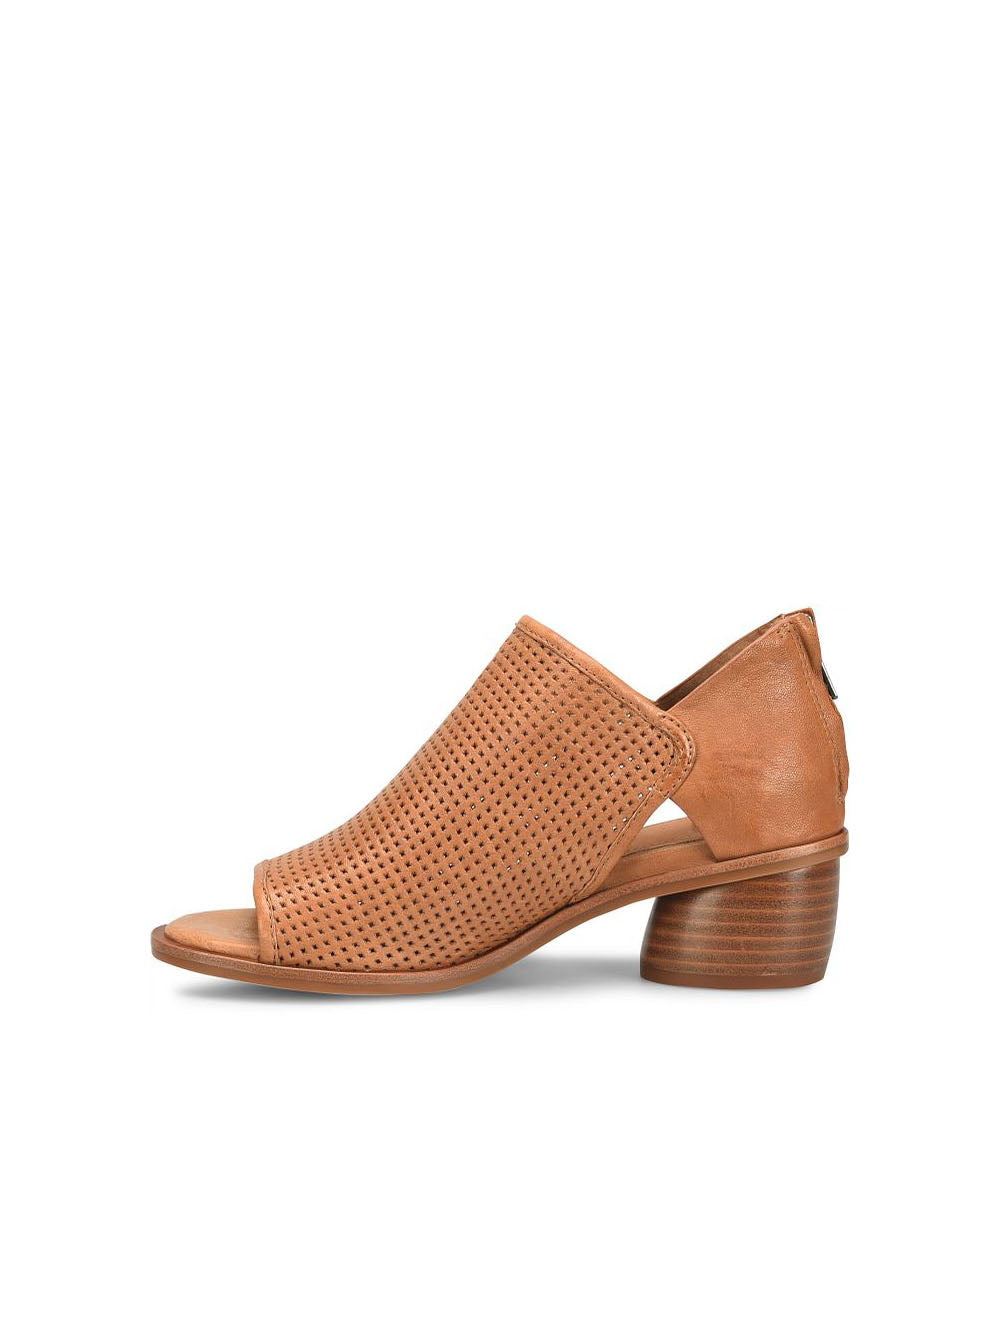 sofft shoes carleigh perforated peep toe bootie in luggage tan